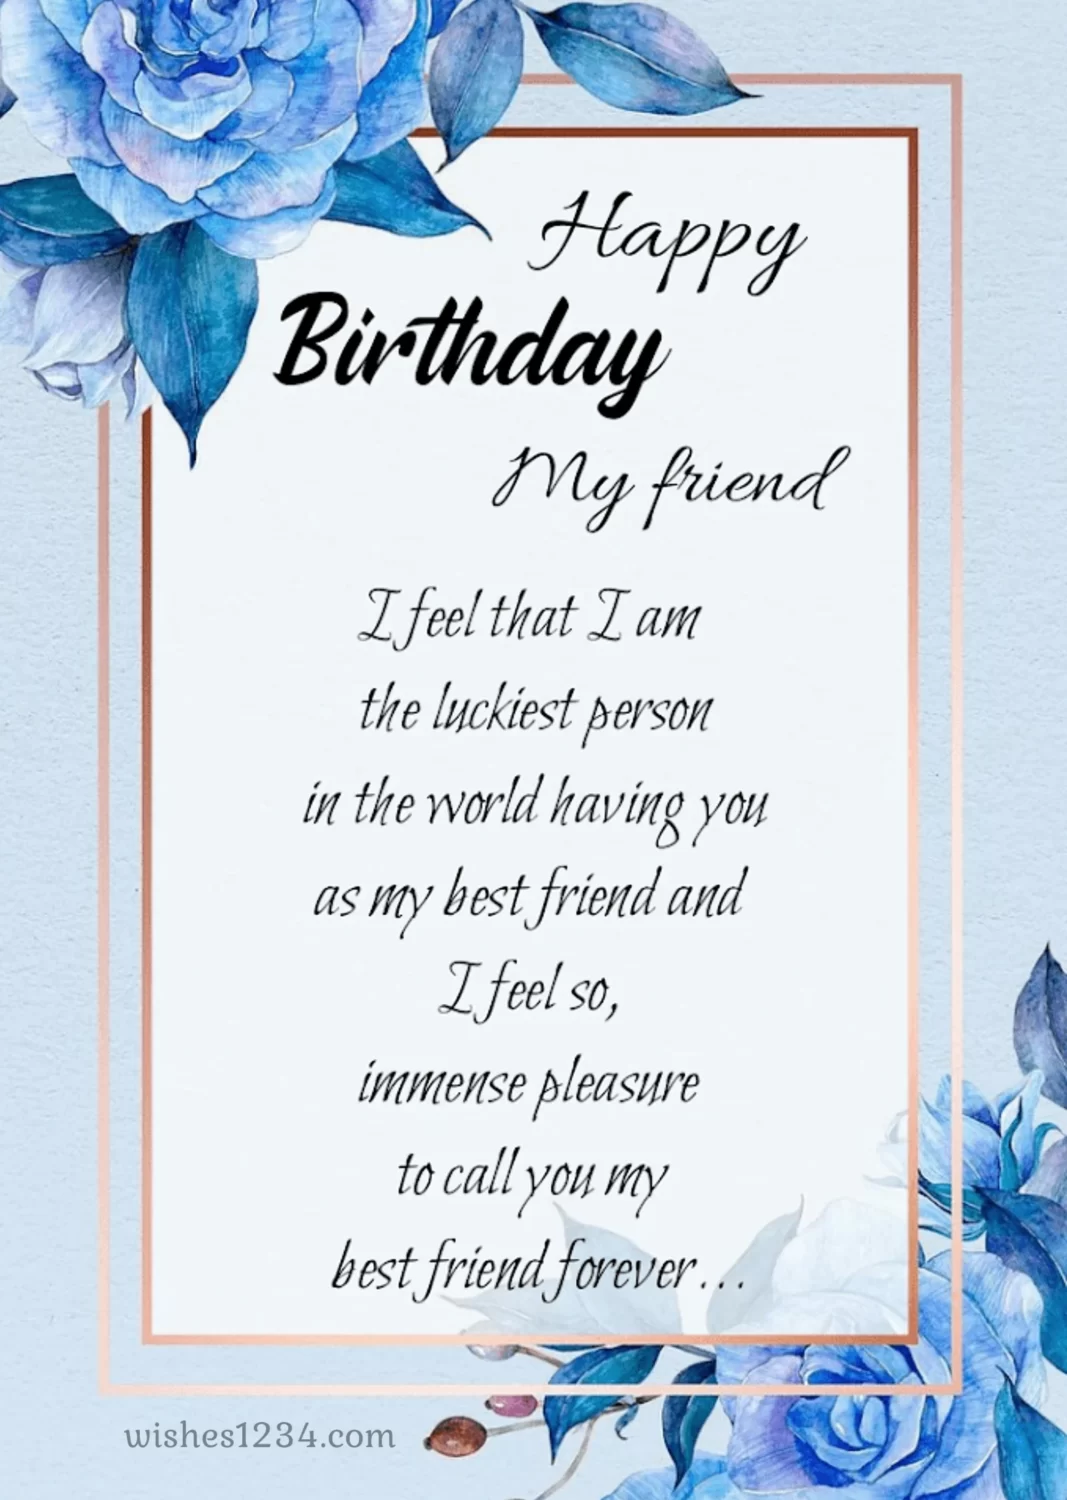 Birthday message with flowers border background, Birthday quotes for a friend.